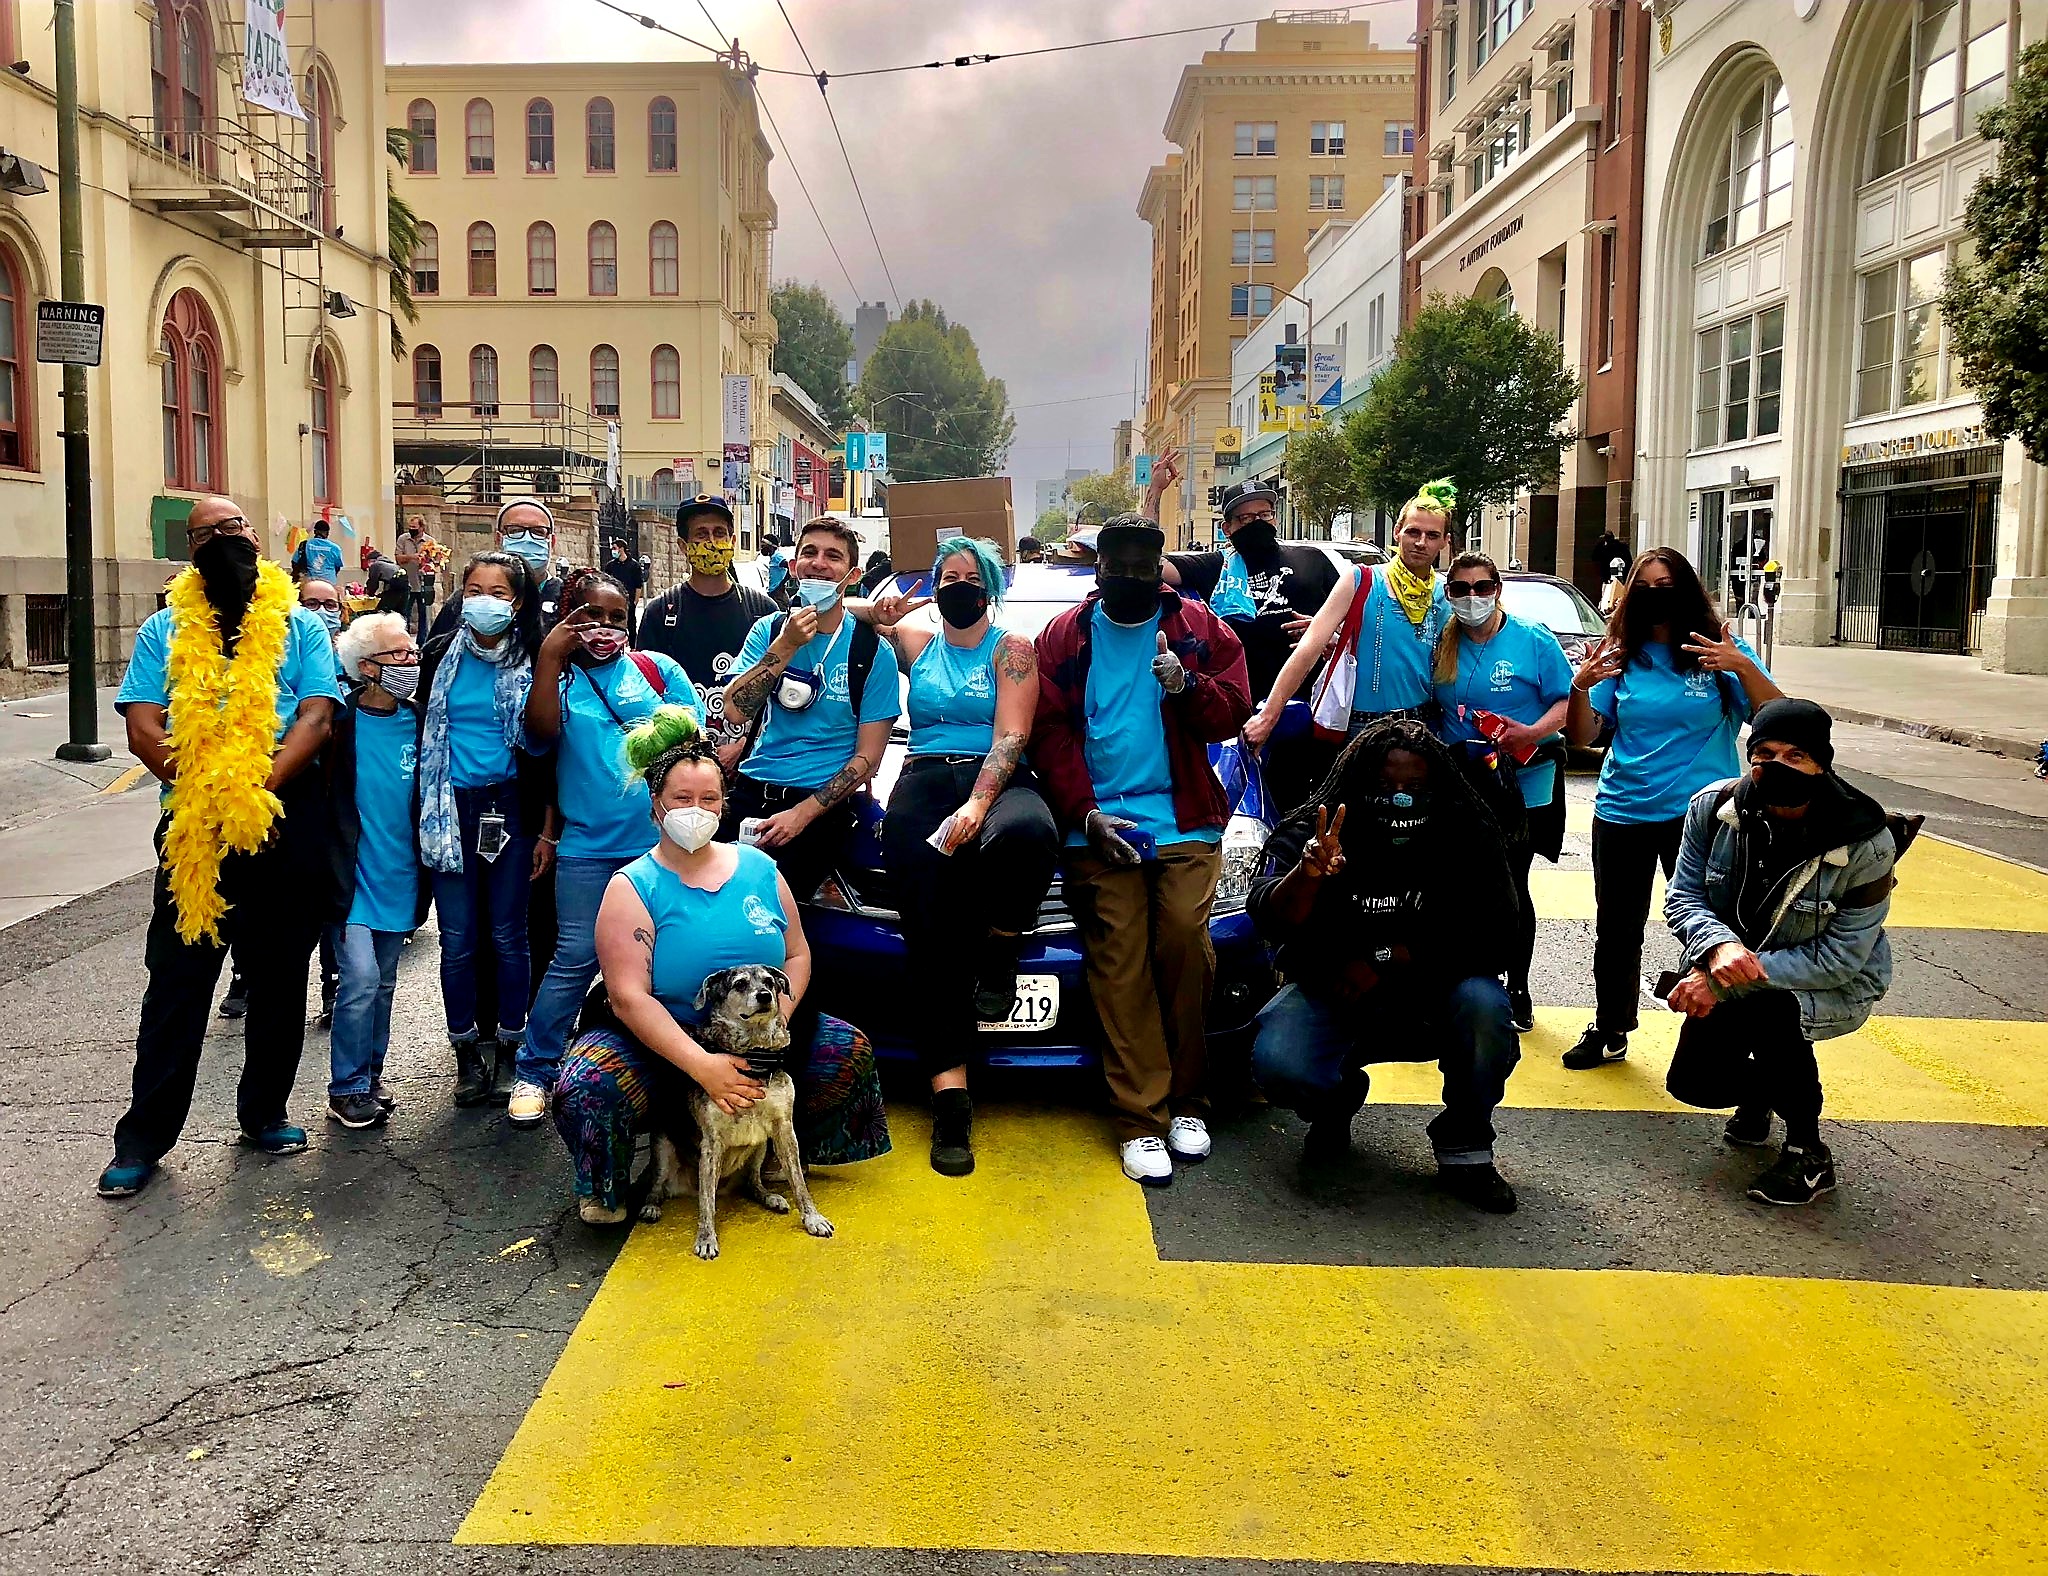 A group of people wearing blue DOPE Project shirts and face masks posing in the street during the Overdose Awareness Day event in San Francisco, 2020.